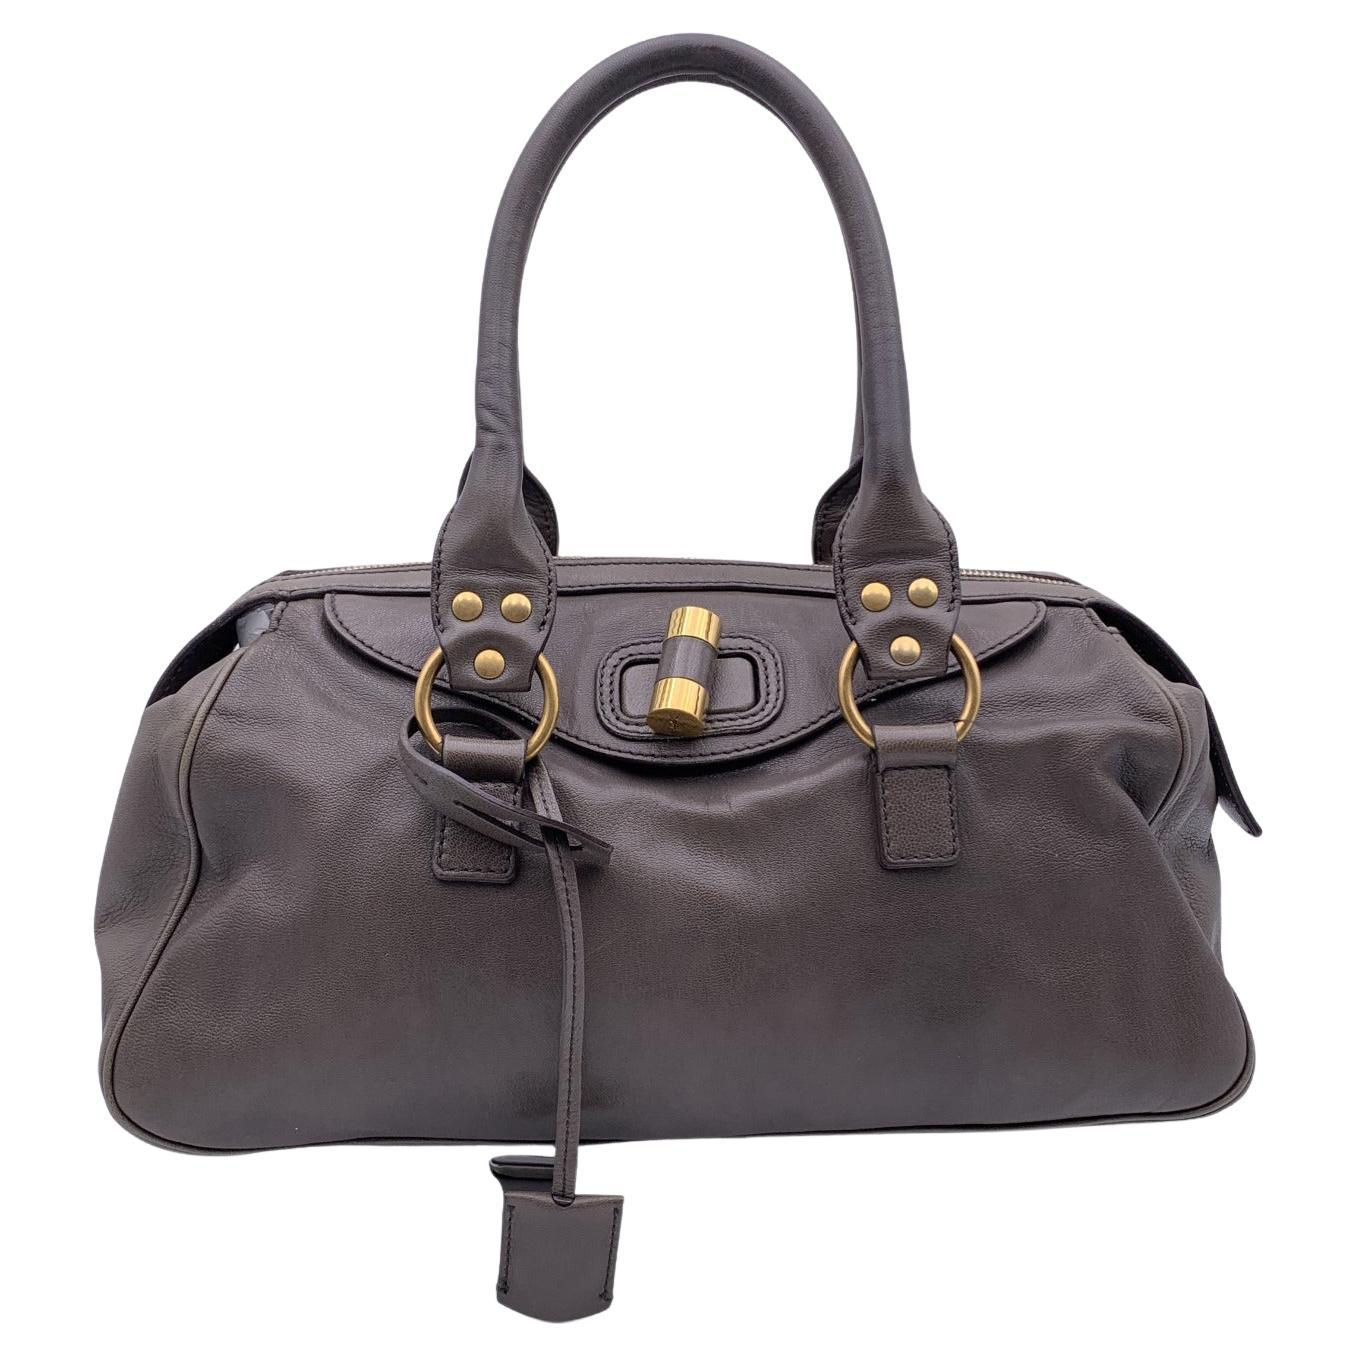 Yves Saint Laurent Grey Taupe Leather Muse Bowler Satchel Bag